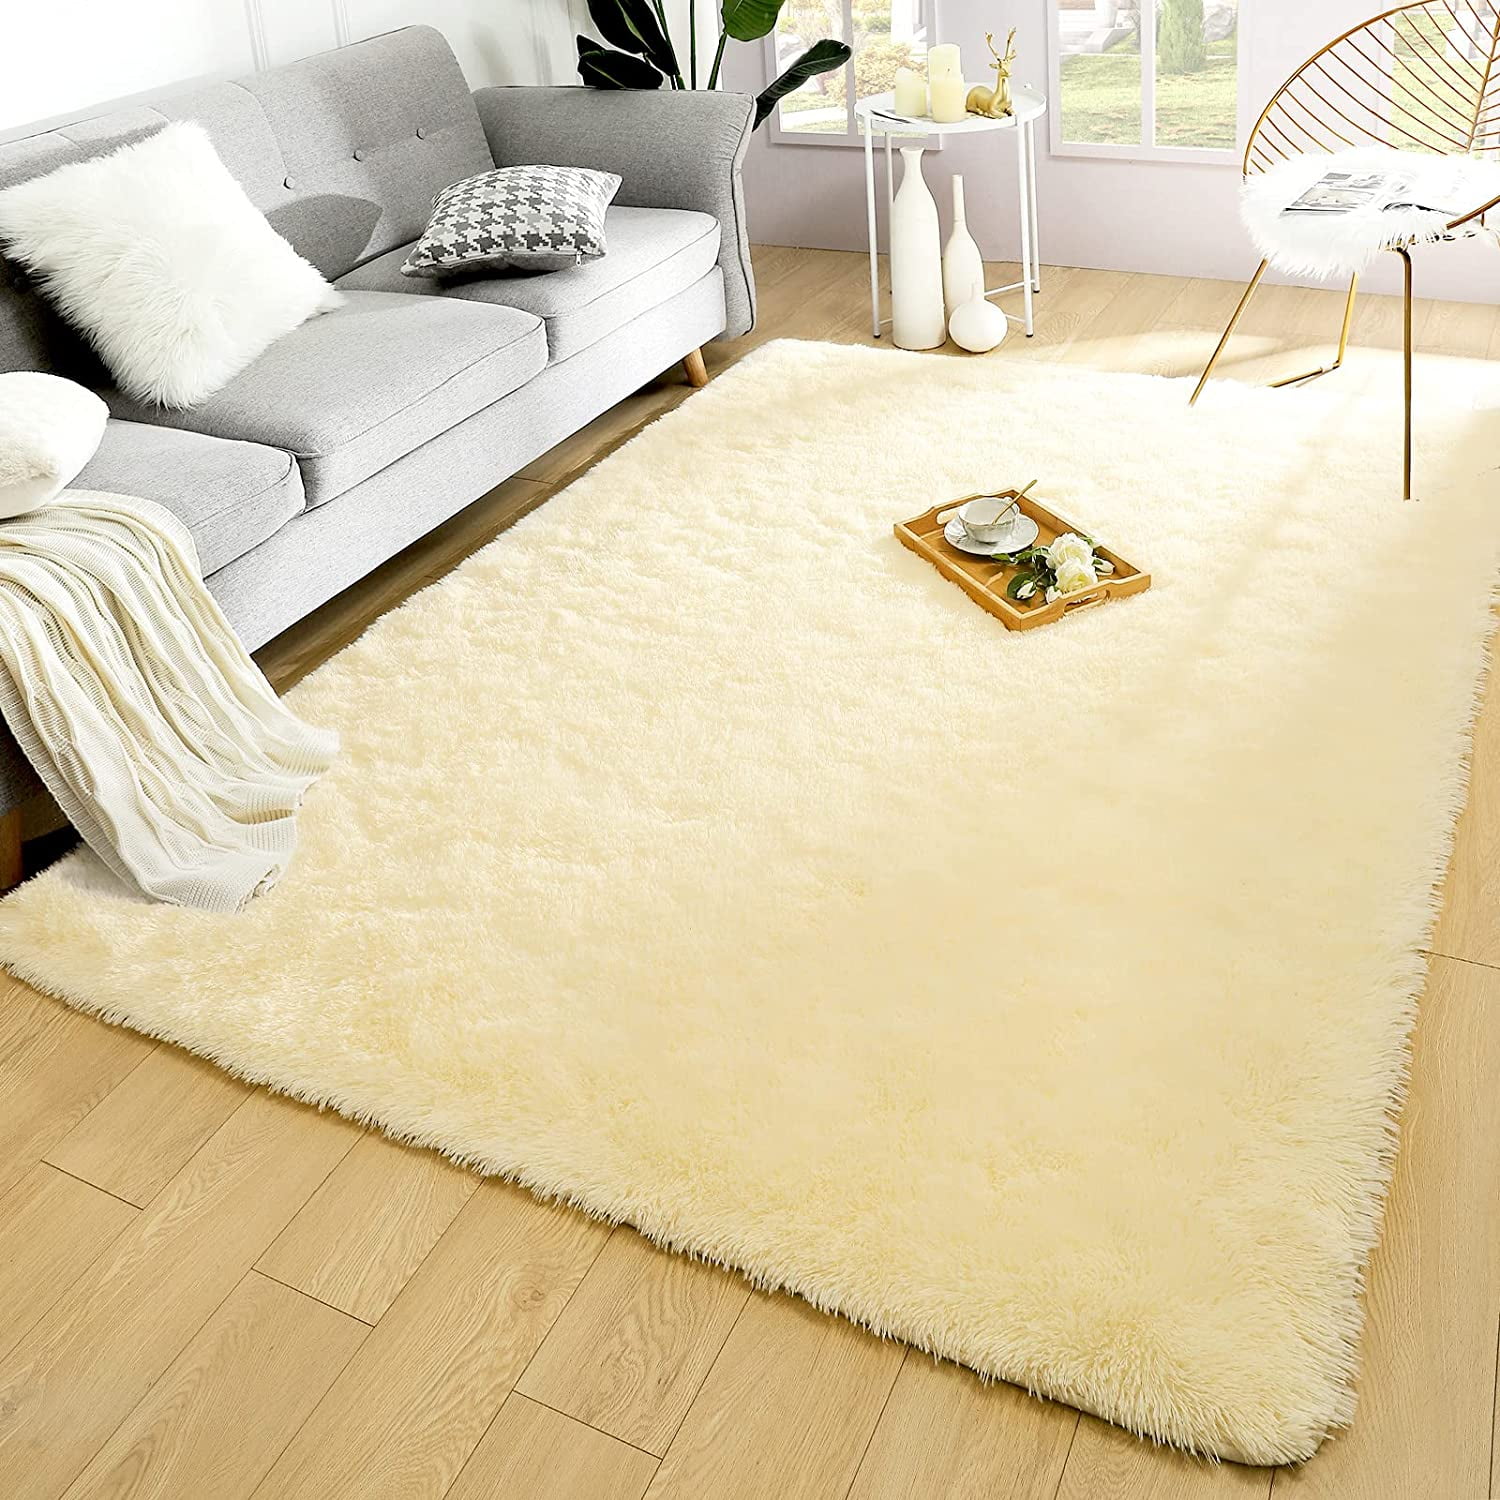 White Rug for Living Room, Super Large 8'X10' Soft Fluffy Shag Area Rug for  Bedroom Nursery Room, Throw Shaggy Furry Carpet, Rectangle Faux Fur Plush